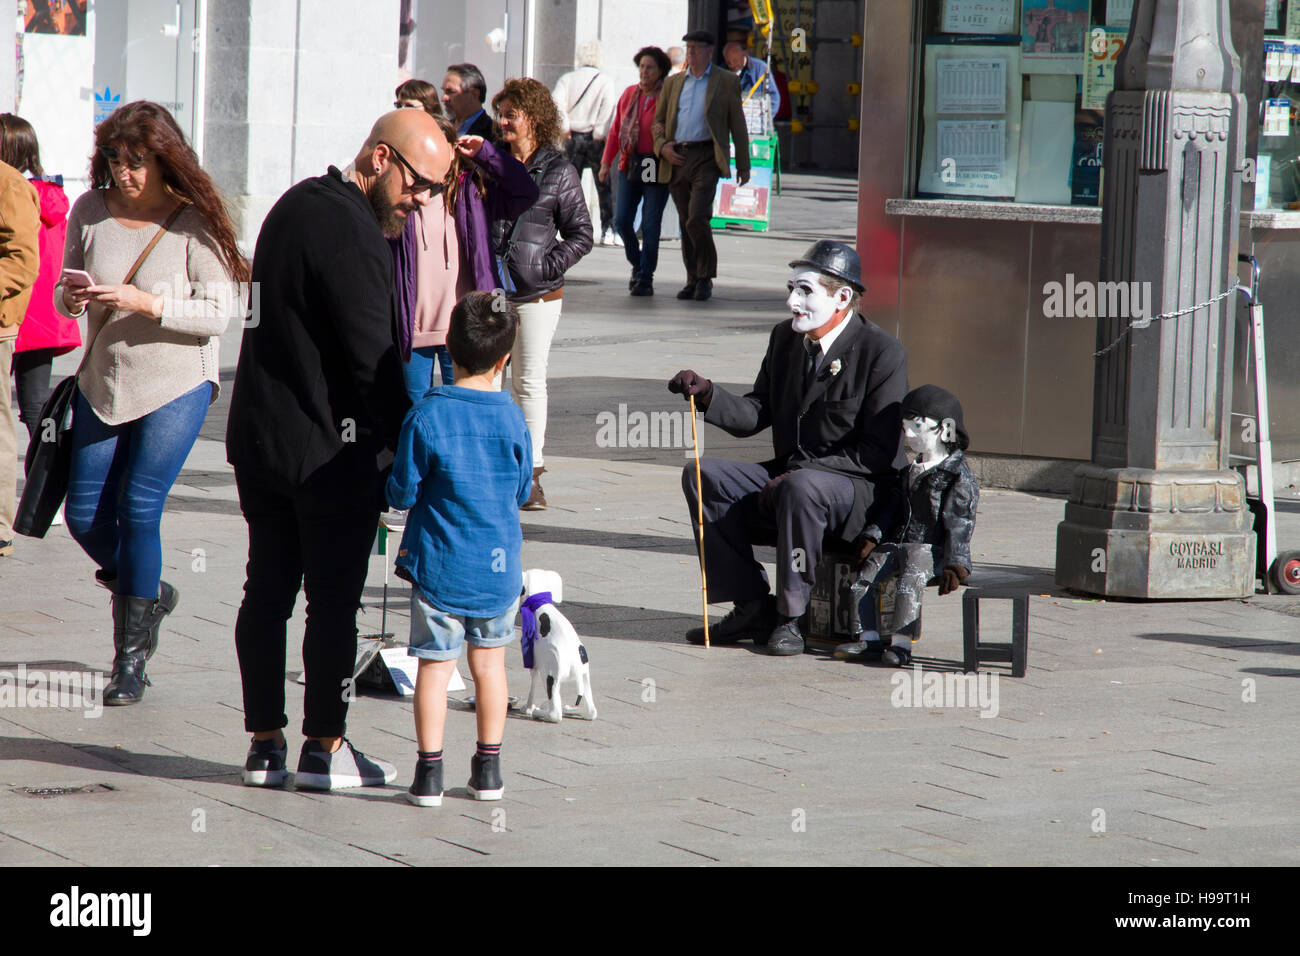 Madrid Spain performer Charlie Chaplin cosplay father and son Stock Photo